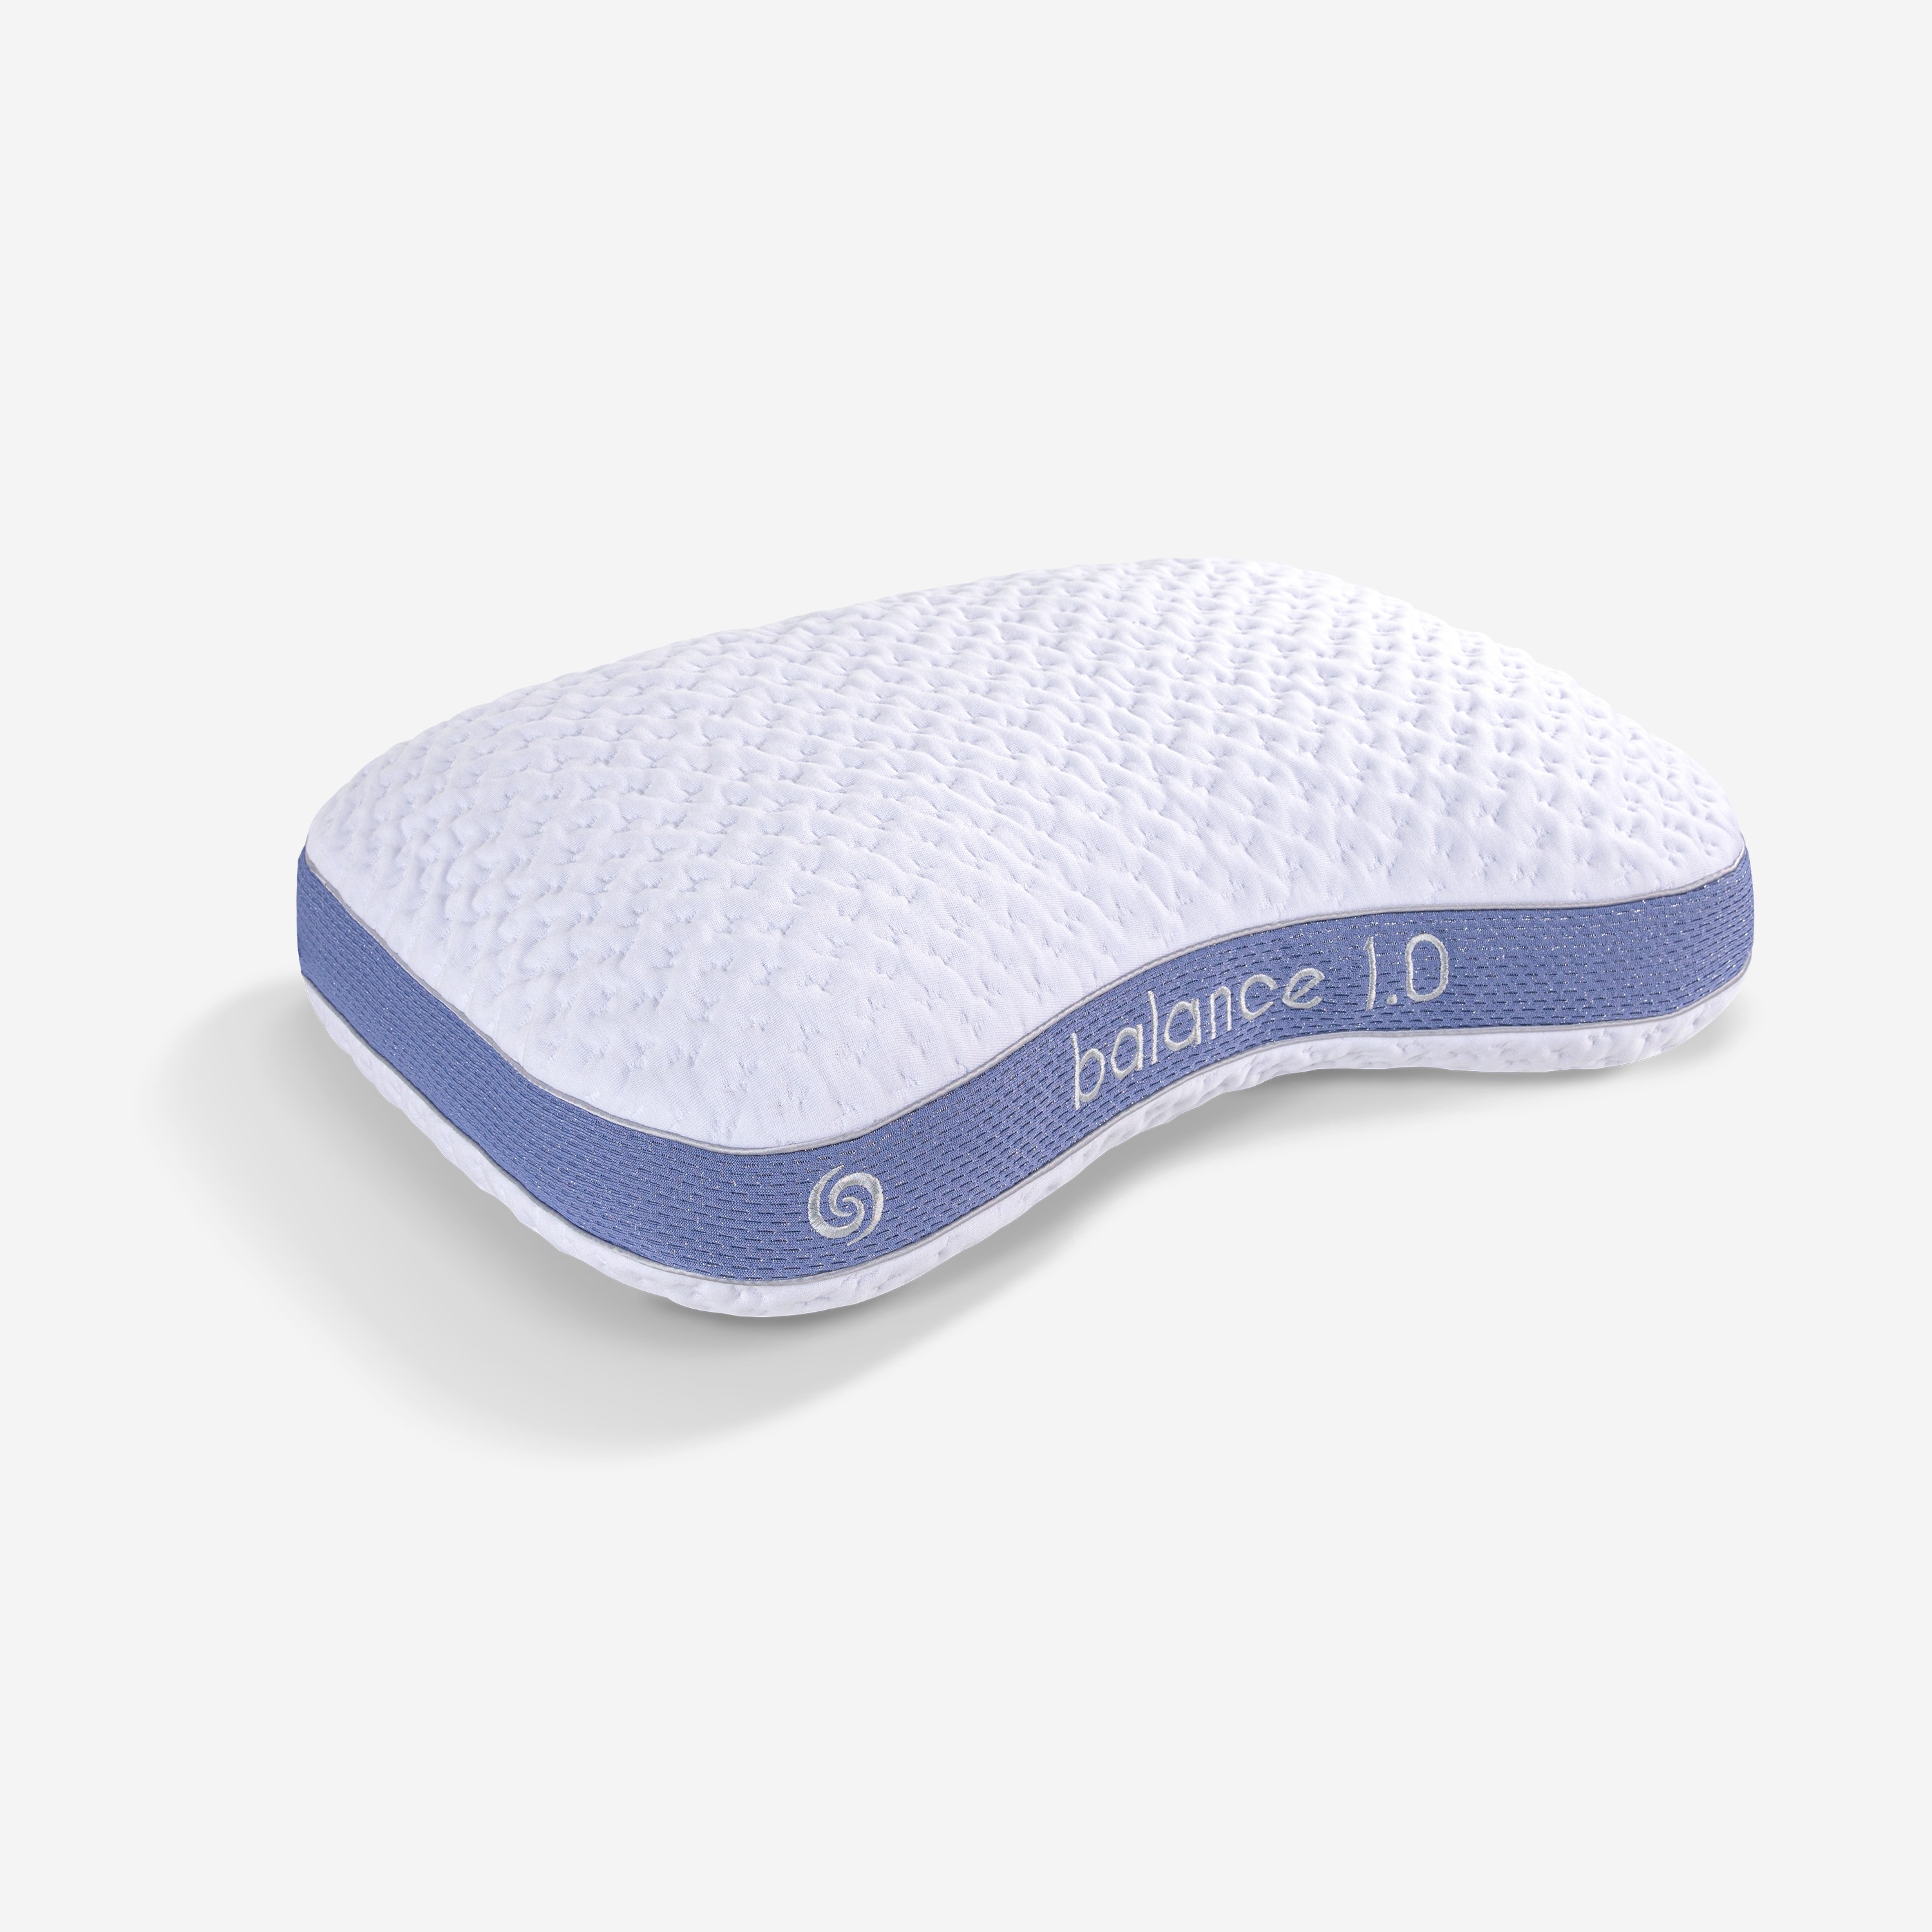 Bedgear Balance Cuddle Curve Performance Pillow - Size 1.0, 2.0 and 3.0 - Firm Support Pillow for Neutral/Warm Sleepers